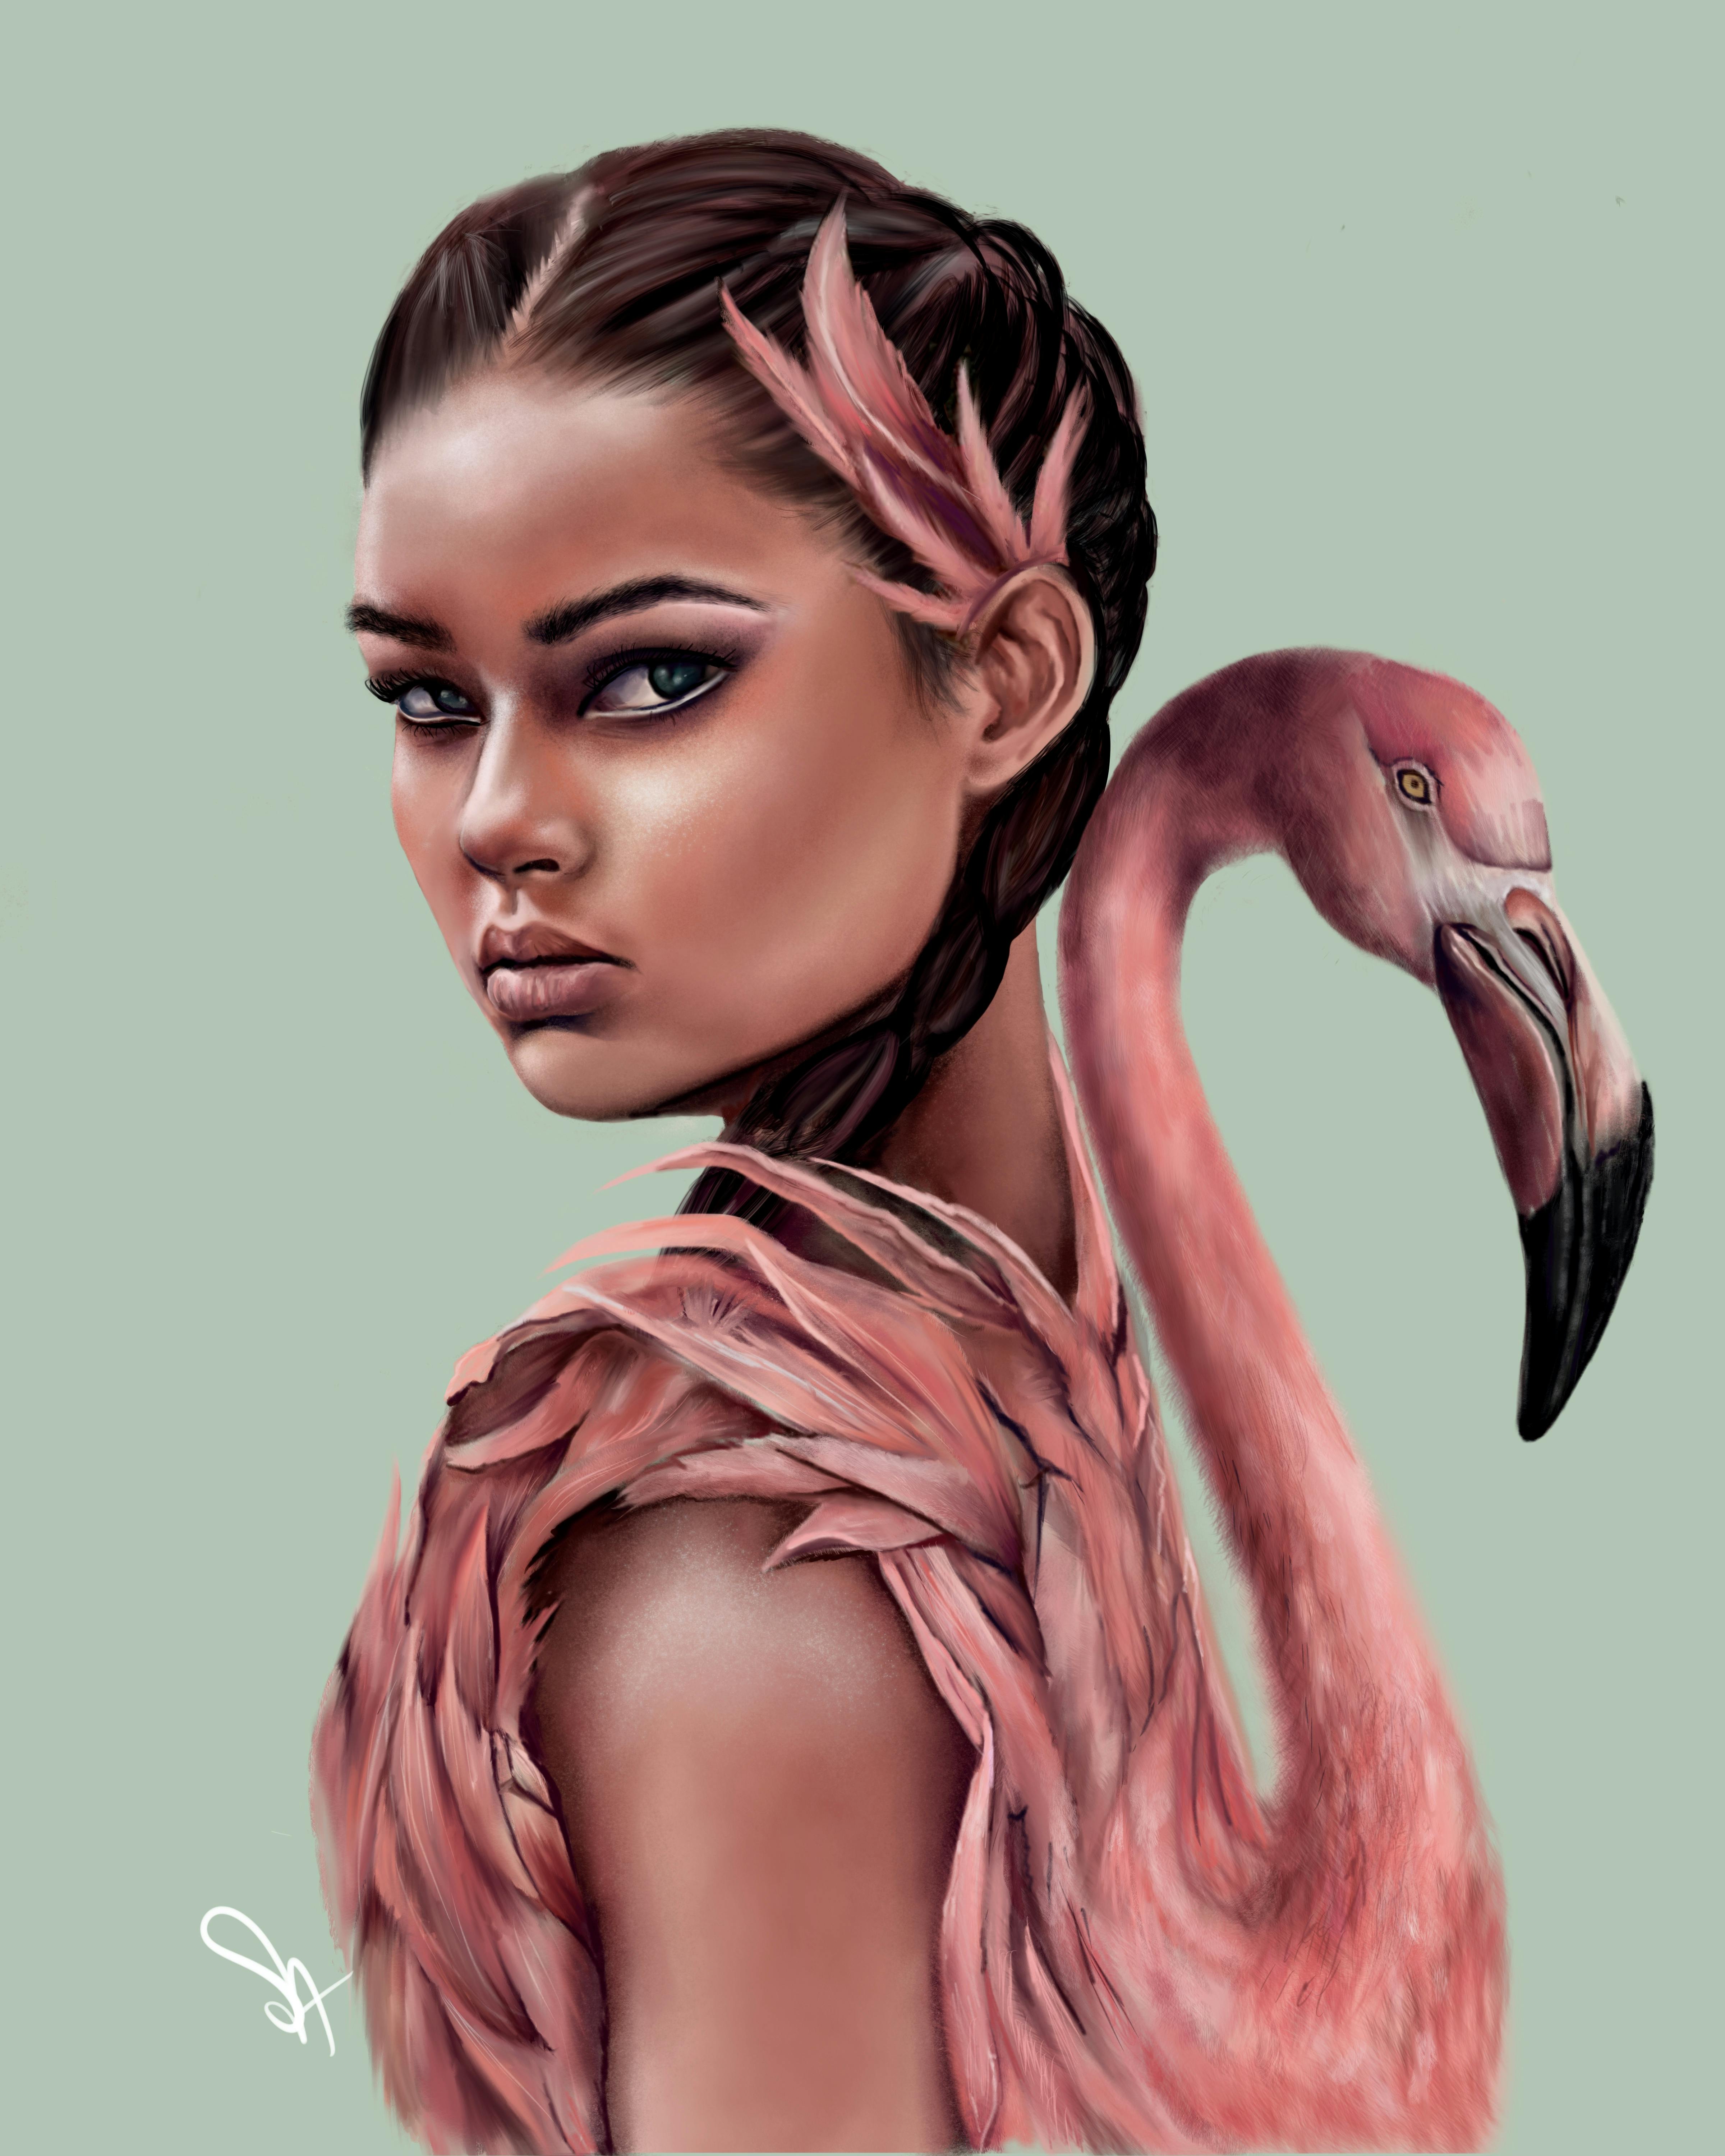 Cover Image for "Flamingo" by Sandra Acosta